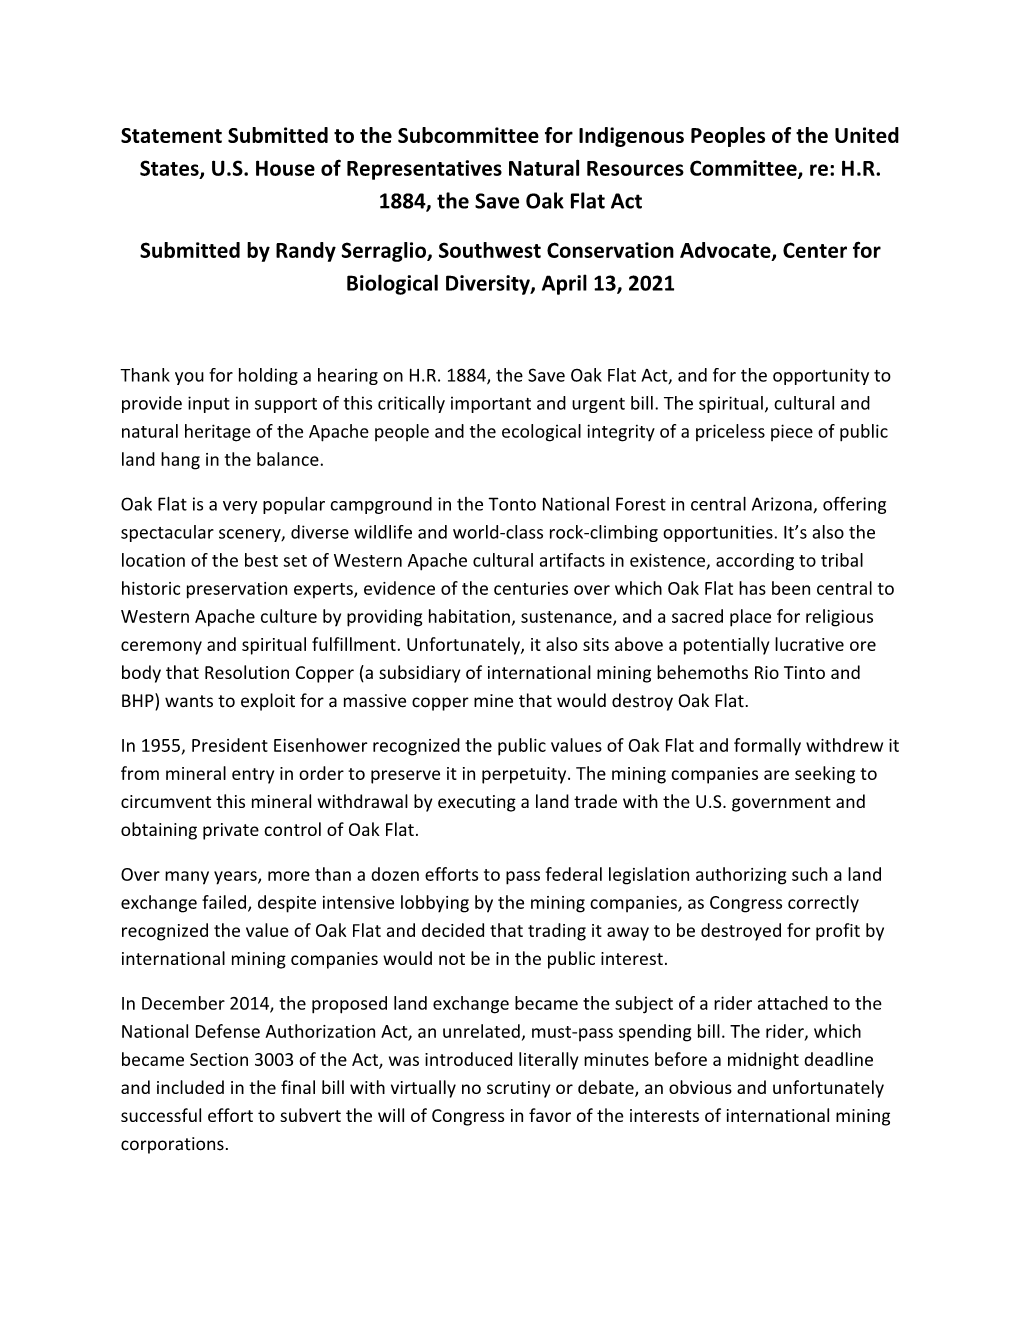 Statement Submitted to the Subcommittee for Indigenous Peoples of the United States, U.S